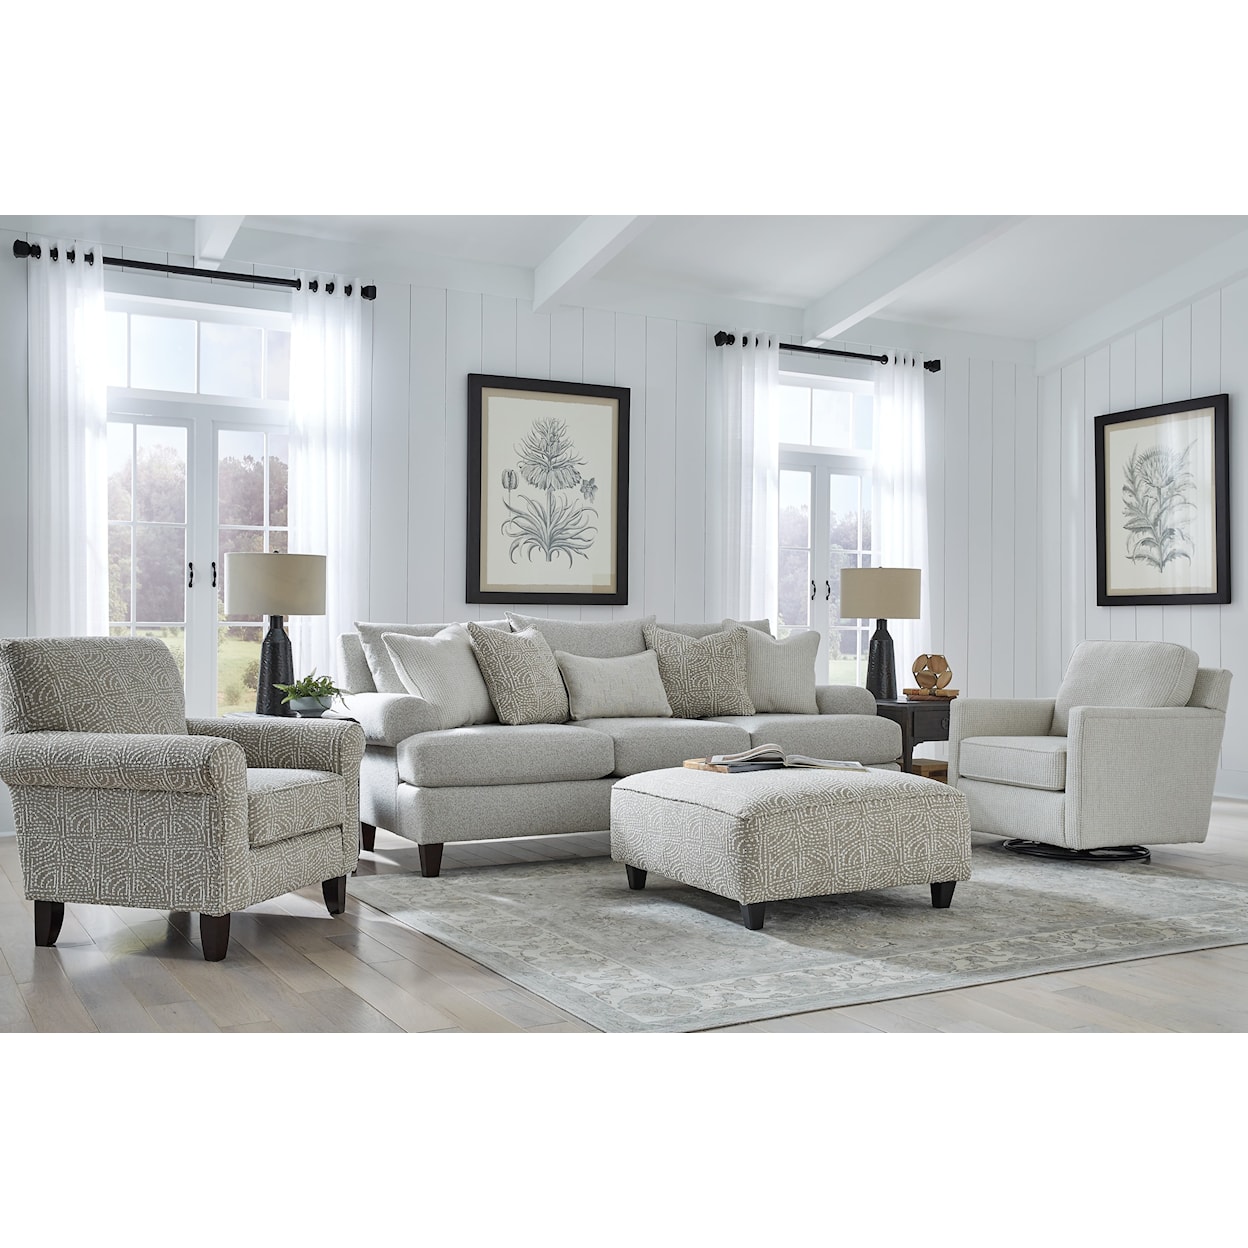 Fusion Furniture Lenora Accent Chair